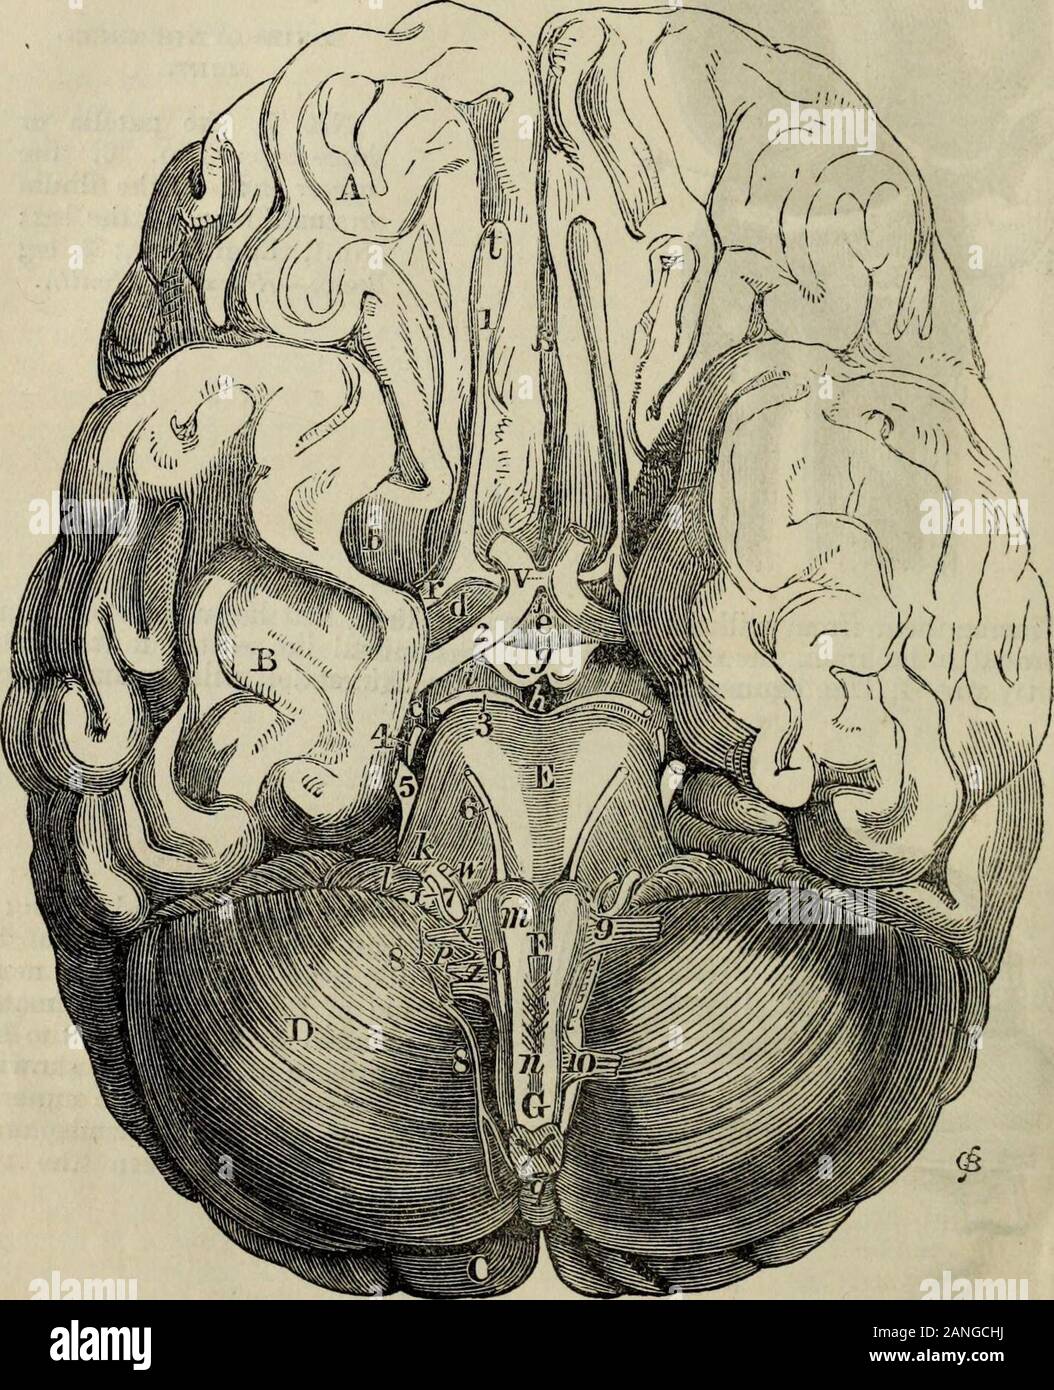 Practical hydropathy, including plans of baths and remarks on diet, clothing and habits of life.. . ingits convolutions; e, the superioredge of the right hemisphere;/, the fissure between the twohemispheres. membrane. 2, Beneath the tegument, muscles, in the forepart and at the vertex,comparativelv slender and delicate; at the sides and posteriorly, thick, strongand powerful 3, Beneath the muscles, a thin but dense membrane, termed the 404 HANDBOOK OF HYDROPATHY. pericranium, lining the external surface of the cranial bones. 4, Beneath the Eericranium, the bony substance of the cranium, consis Stock Photo